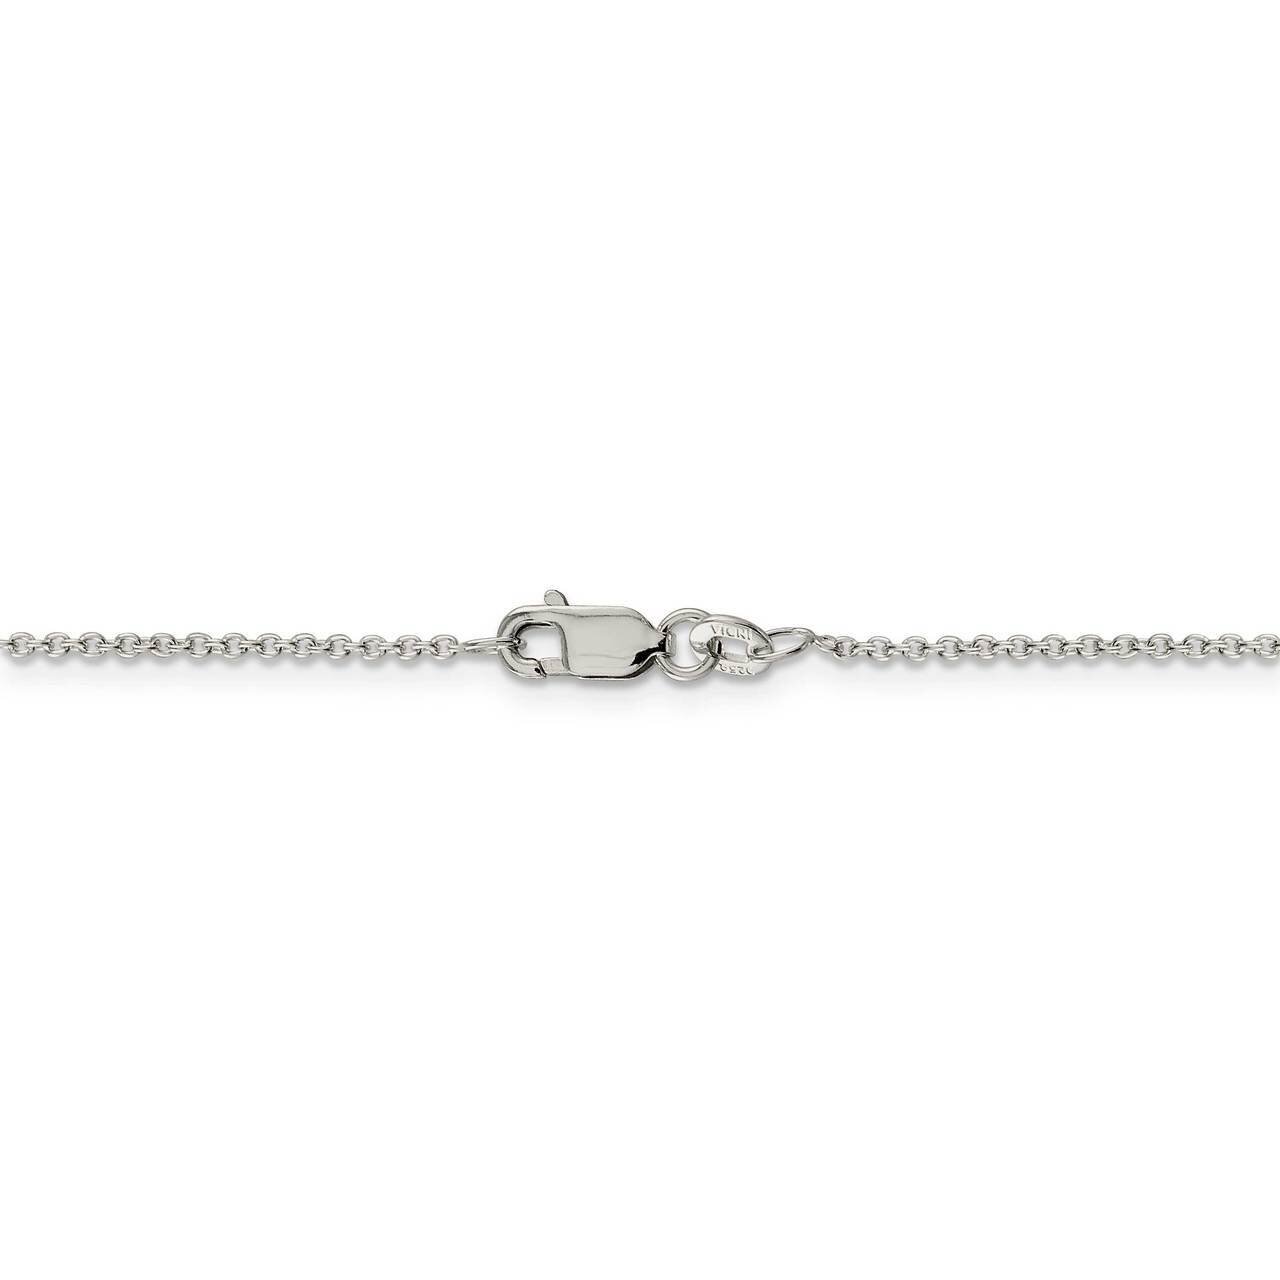 26 Inch 1.25mm Cable Chain Sterling Silver QCL035-26